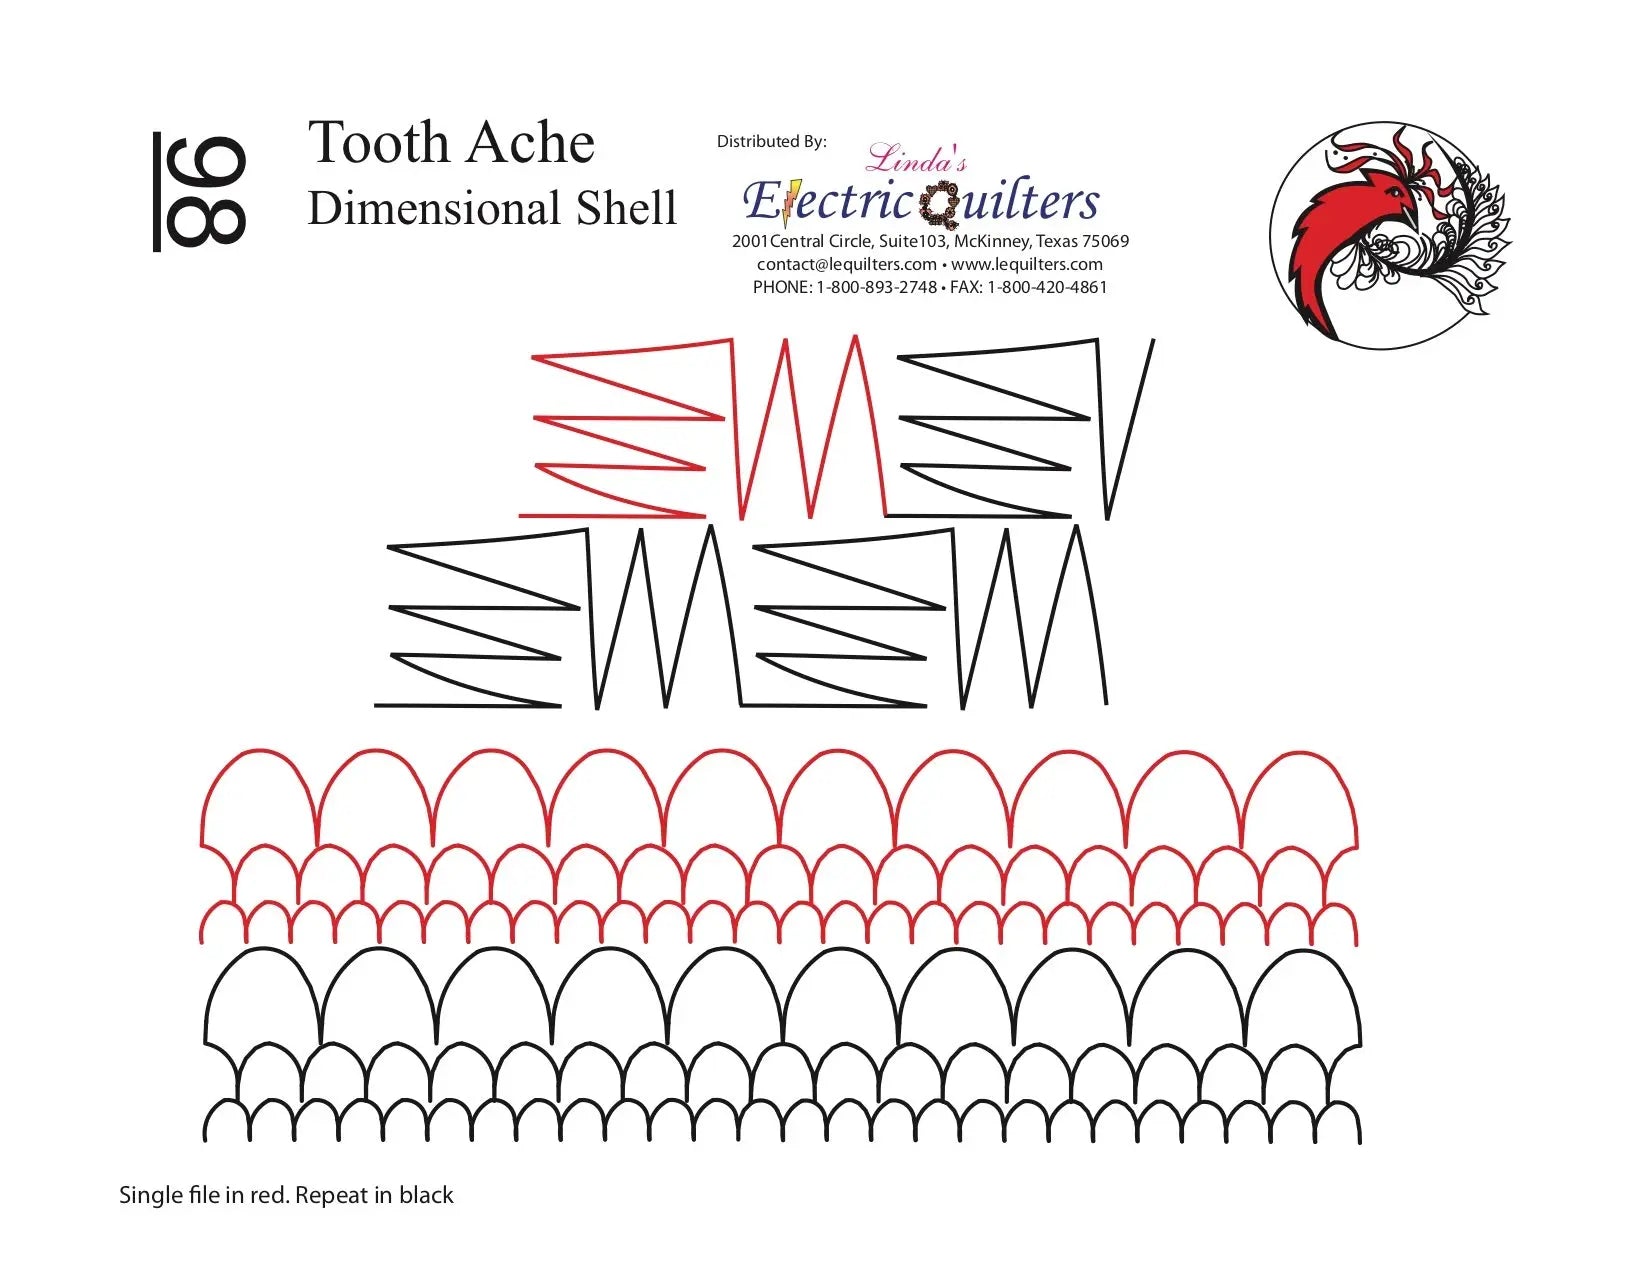 098 Toothache/Dimensional Shell Pantograph by Linda V. Taylor - Linda's Electric Quilters